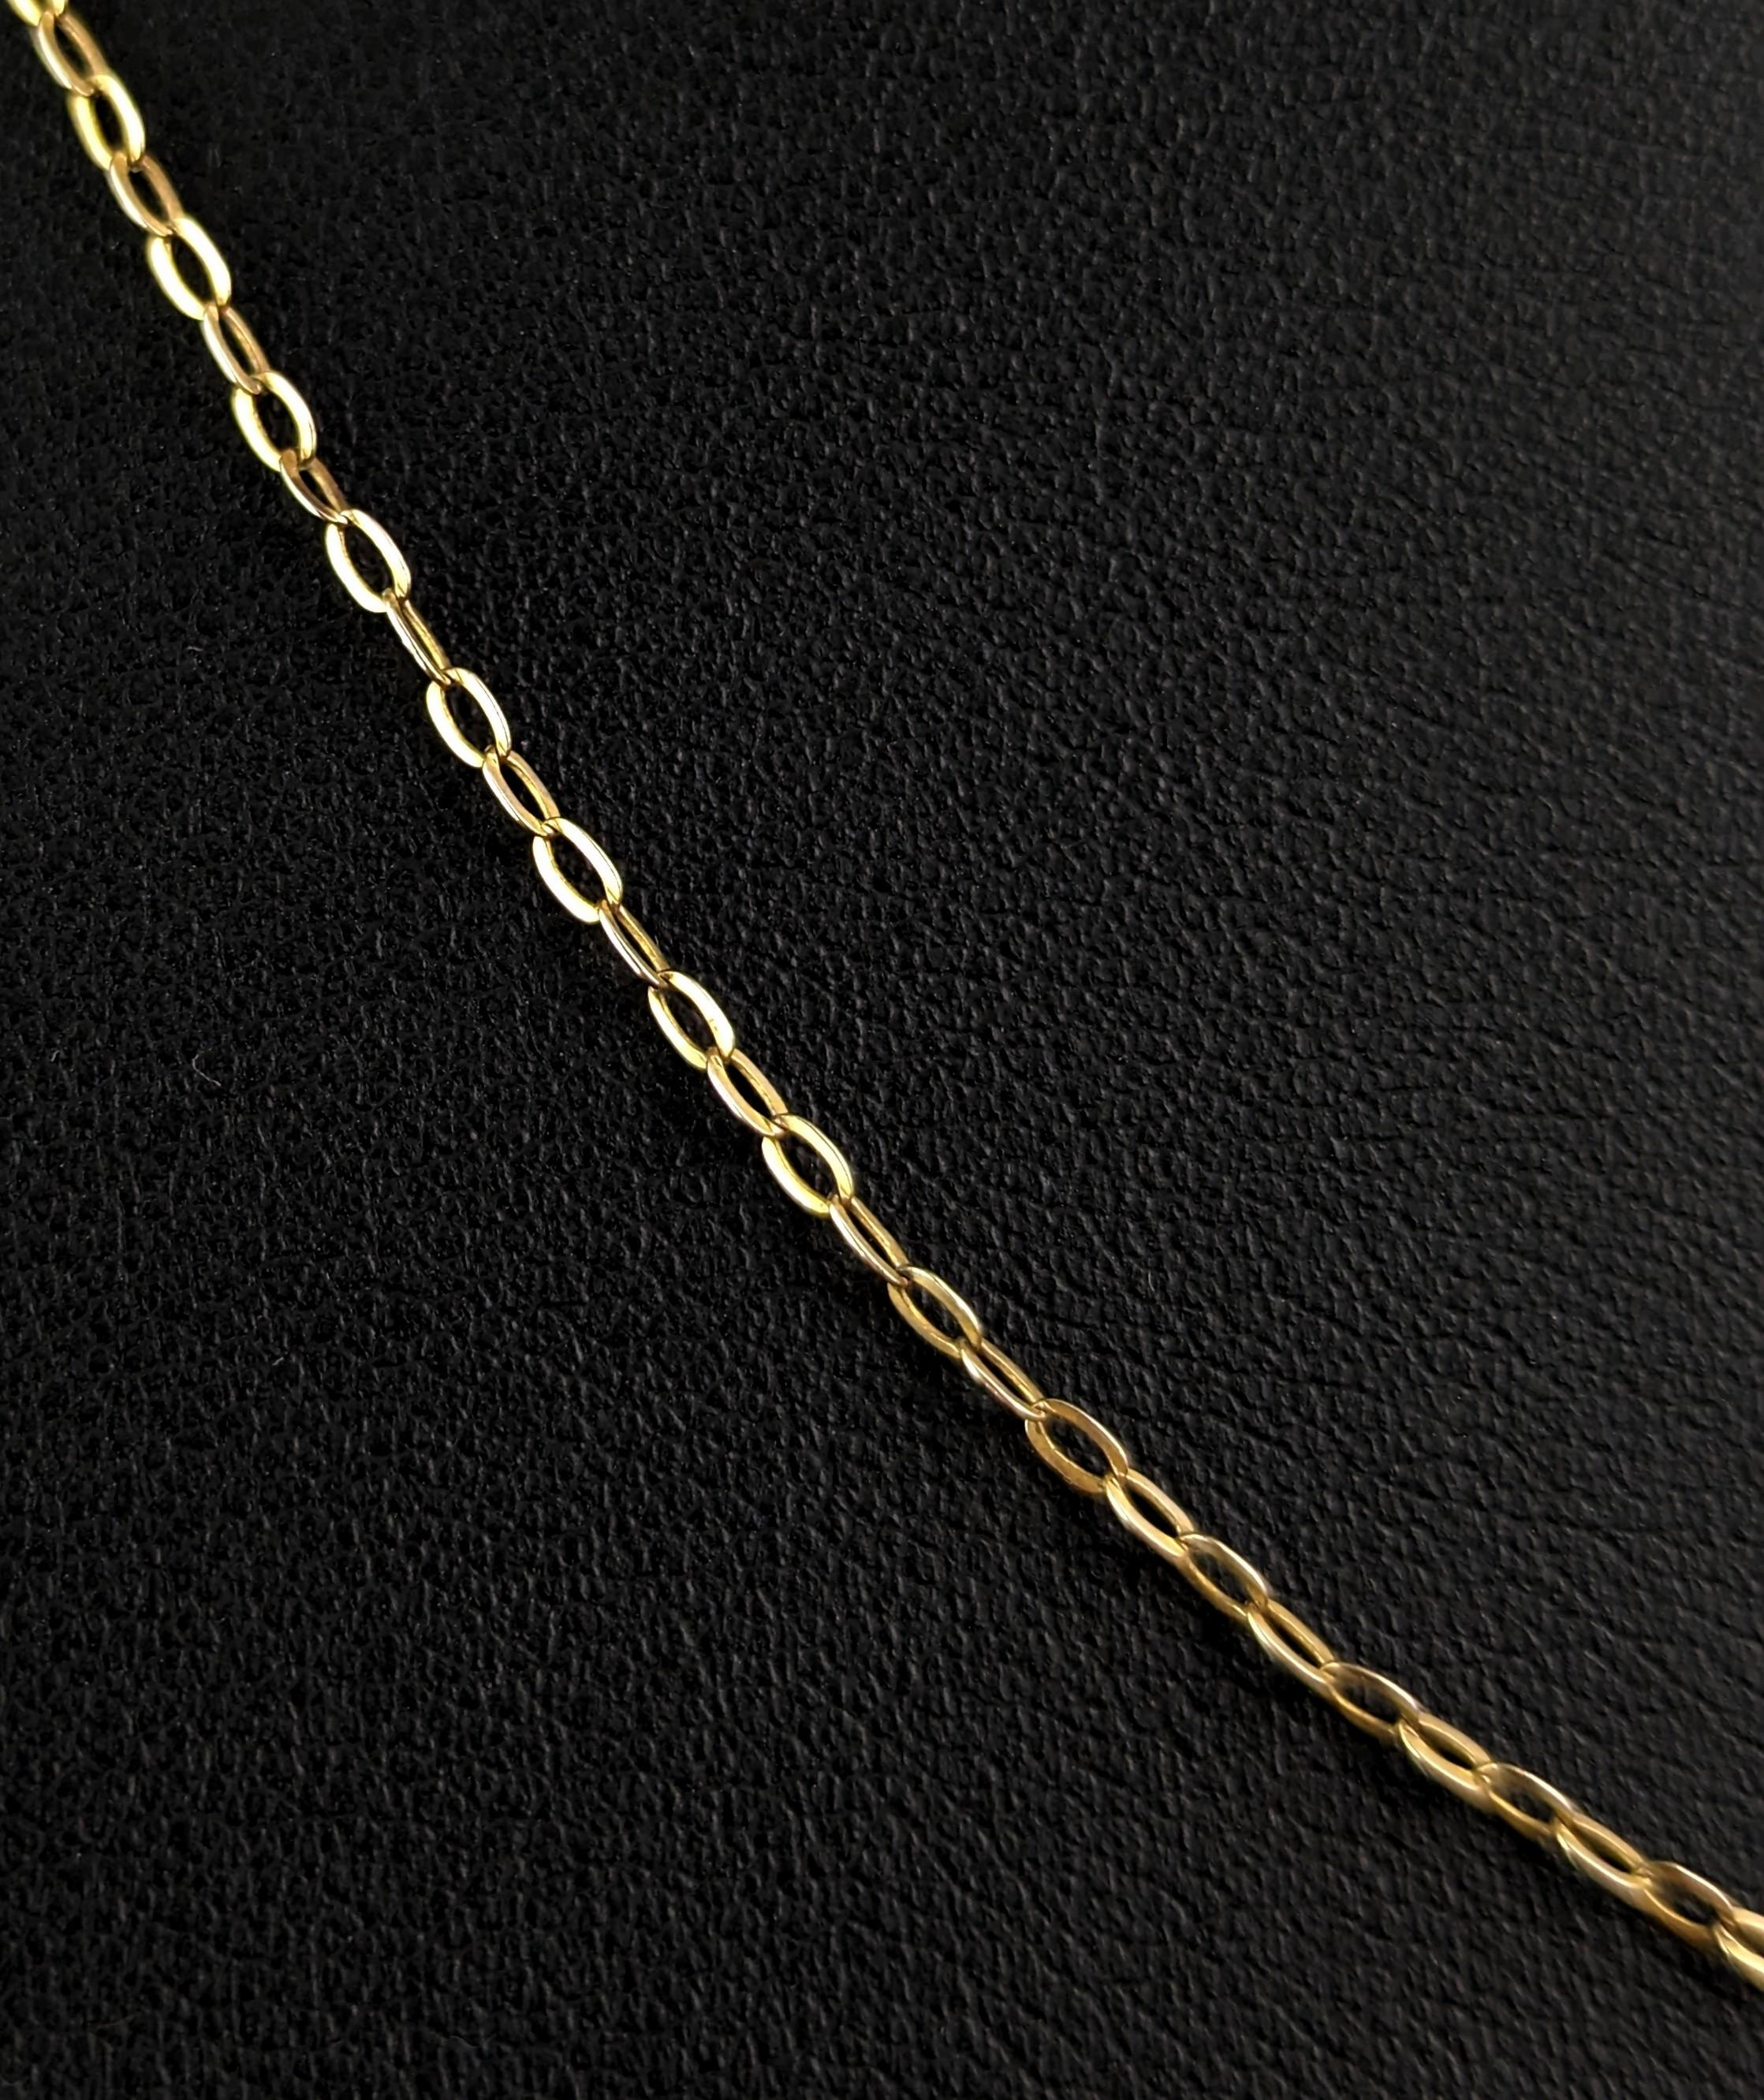 Antique 9k yellow gold trace chain necklace, dainty  5